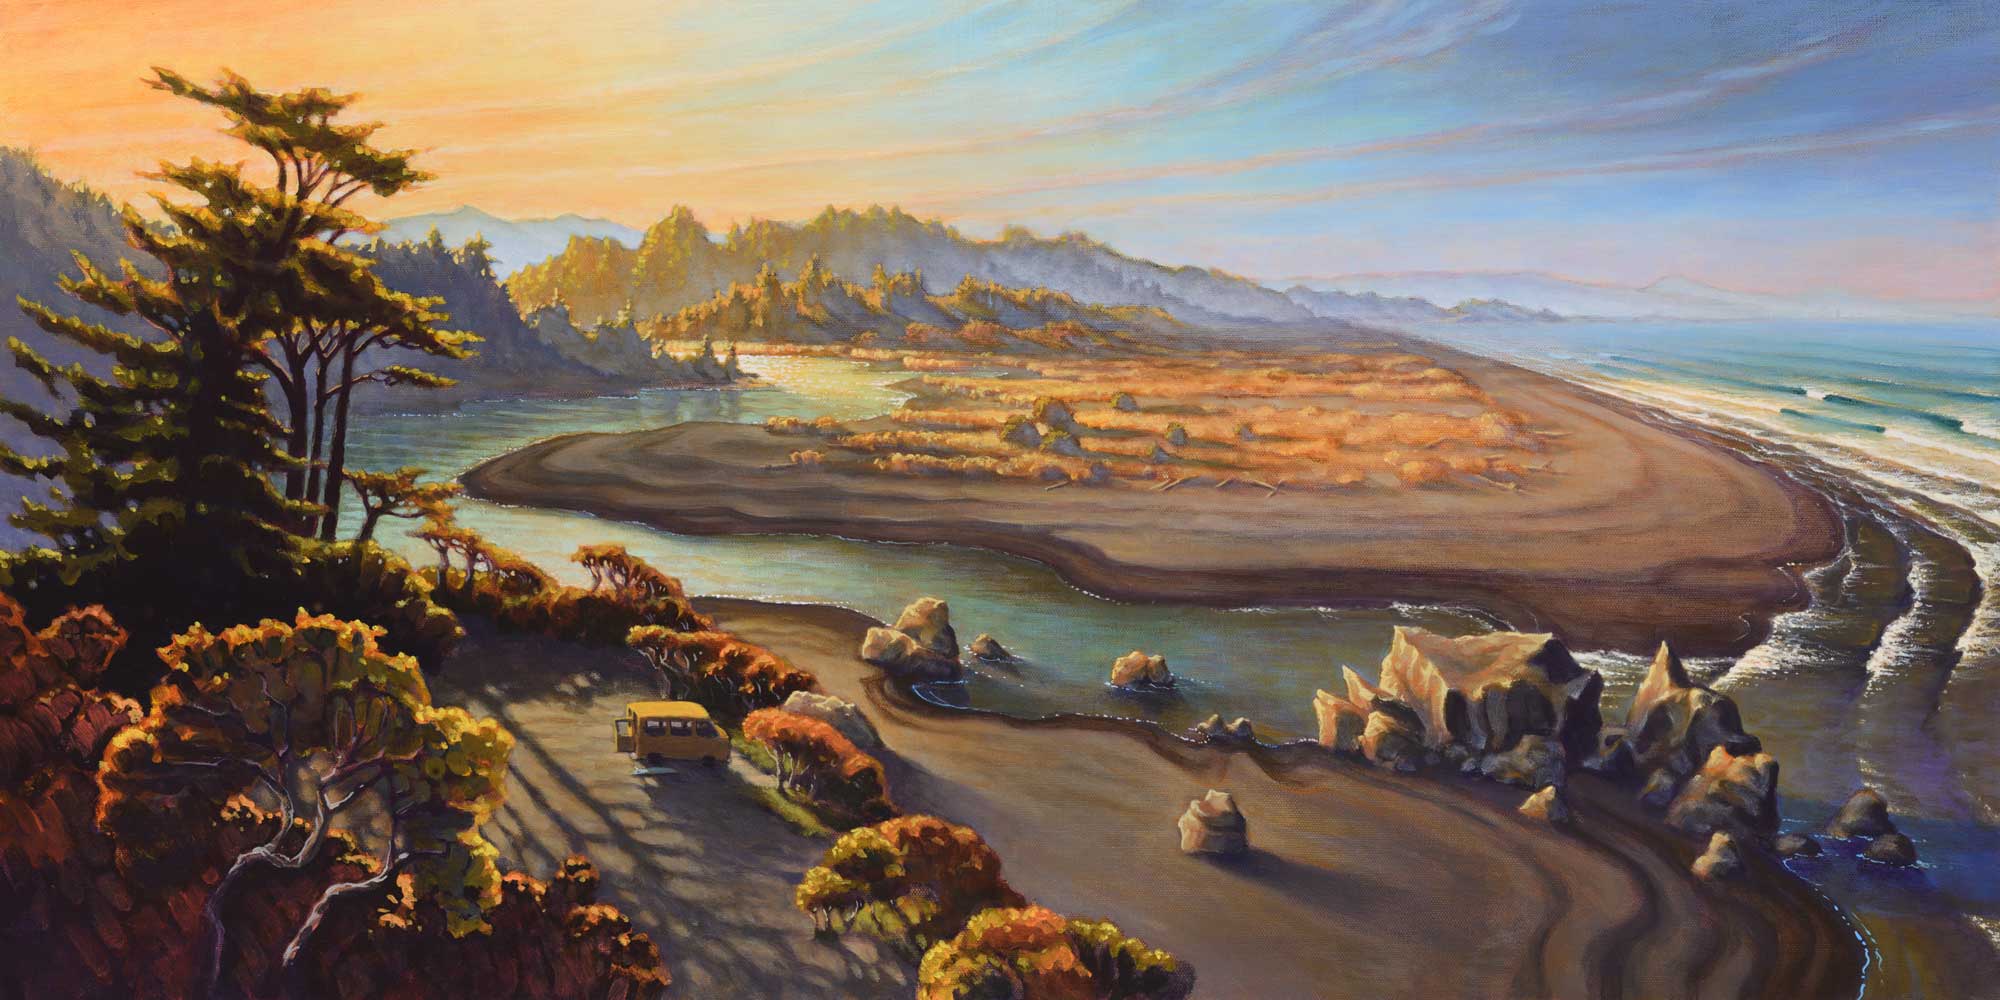 A landscape painting of Little River at Moonstone beach on Humboldt's Trinidad coast of northern California